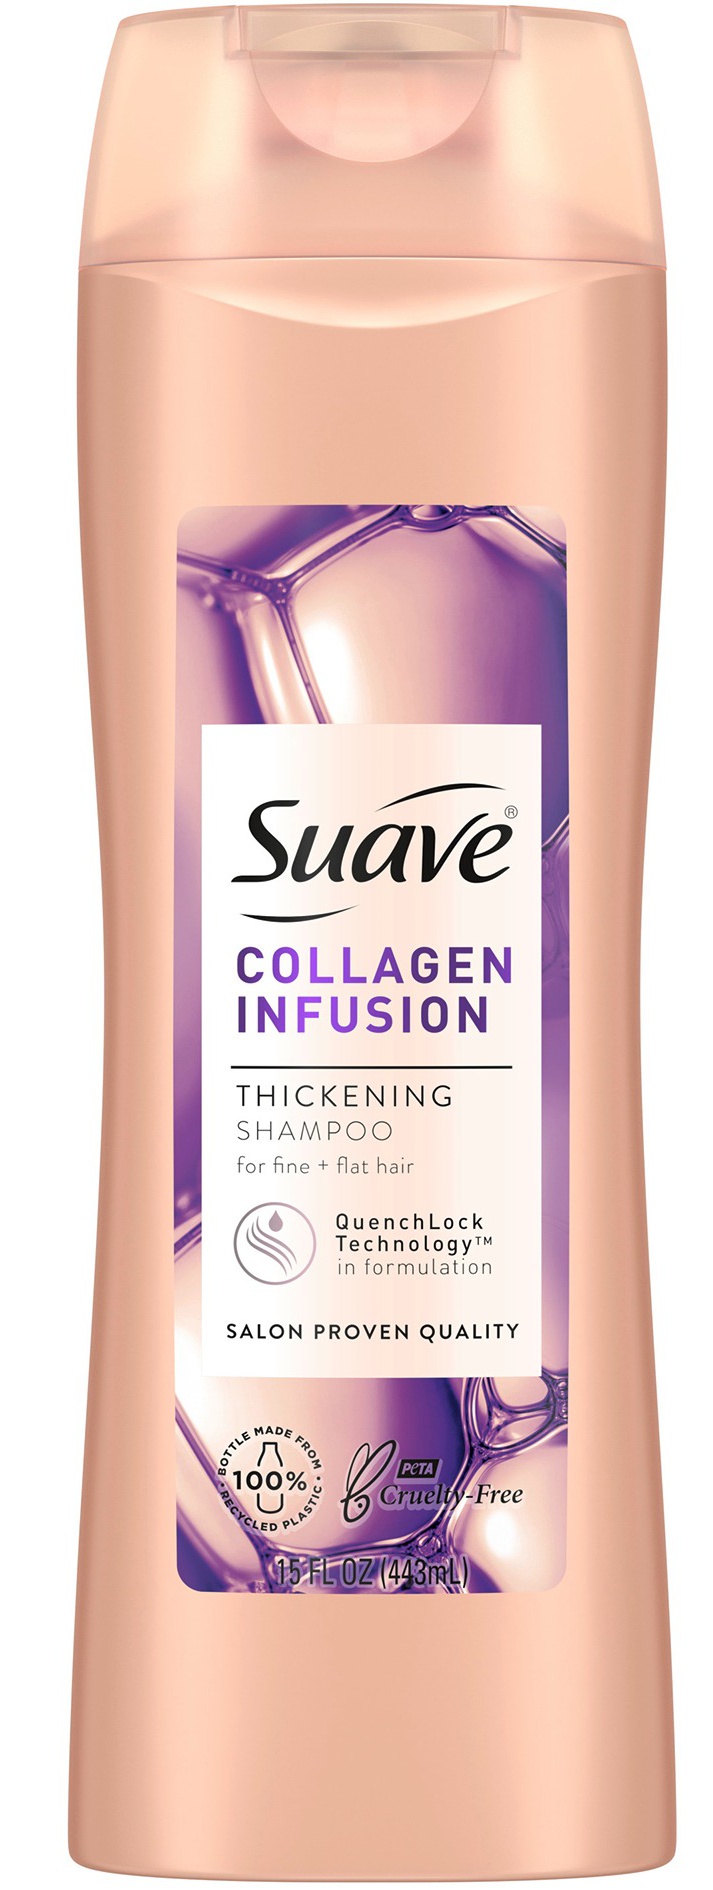 Suave Collagen Infusion Thickening Shampoo